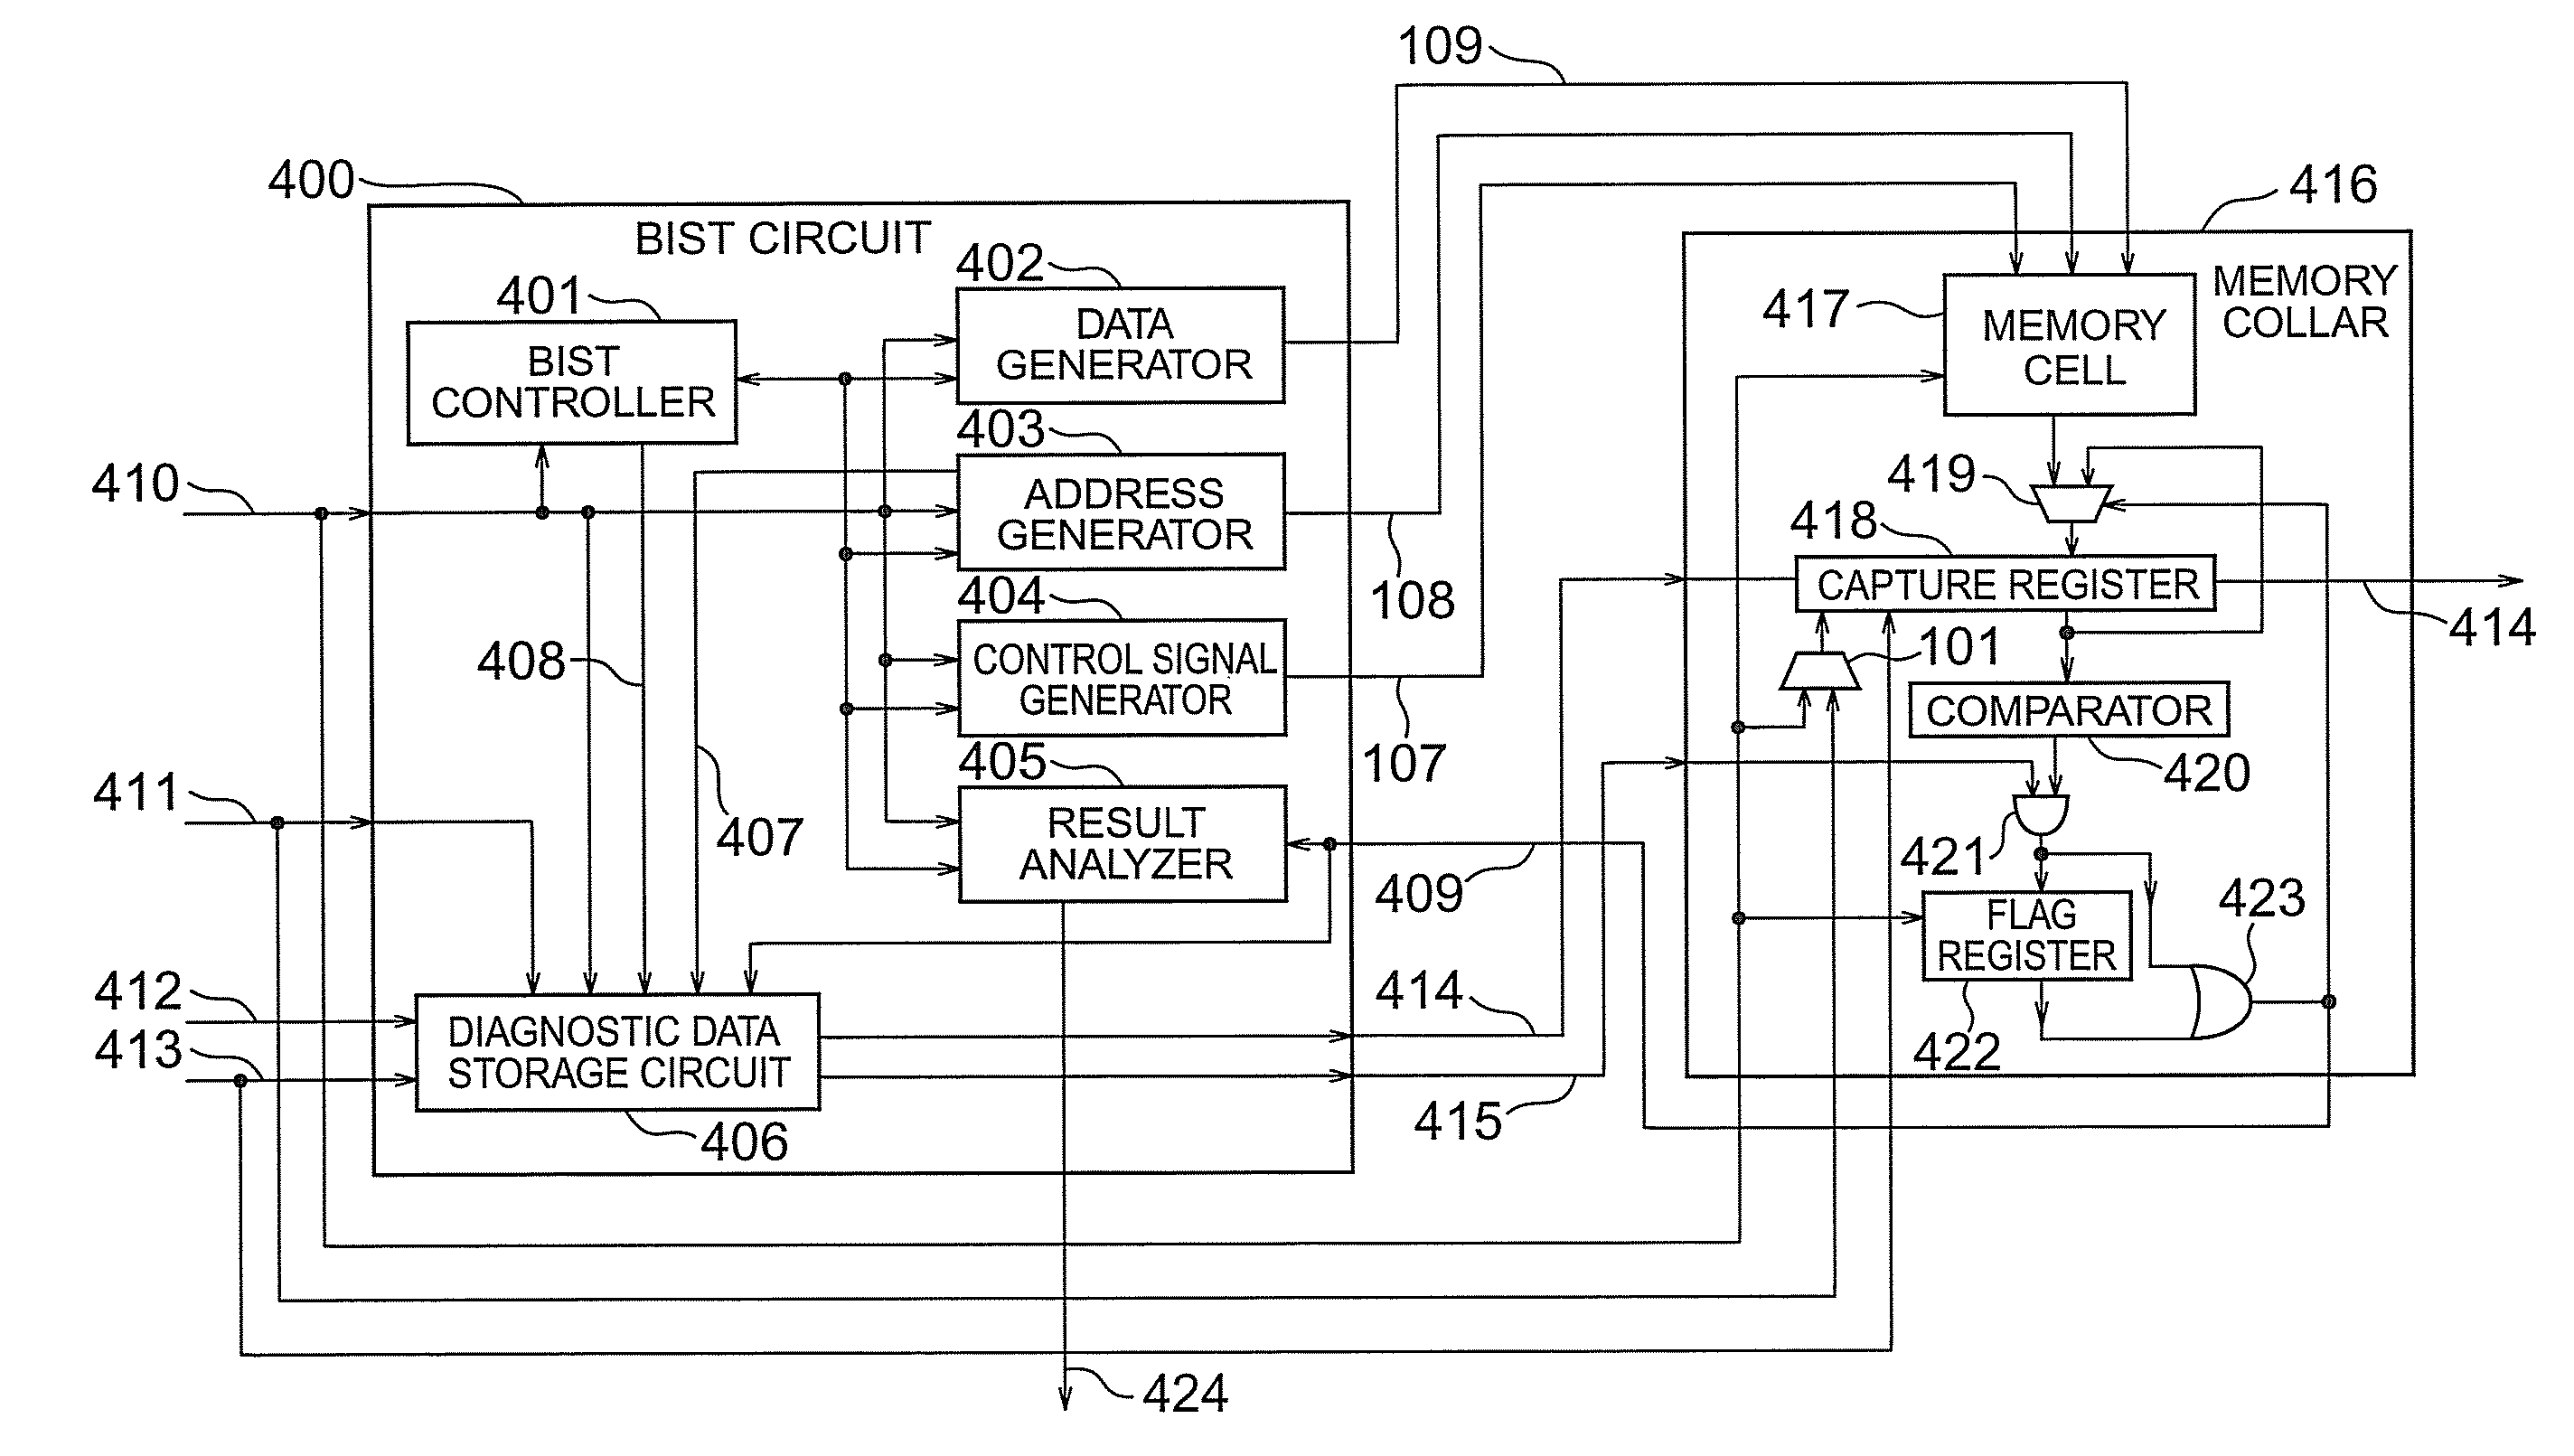 Semiconductor integrated circuit having a (BIST) built-in self test circuit for fault diagnosing operation of a memory